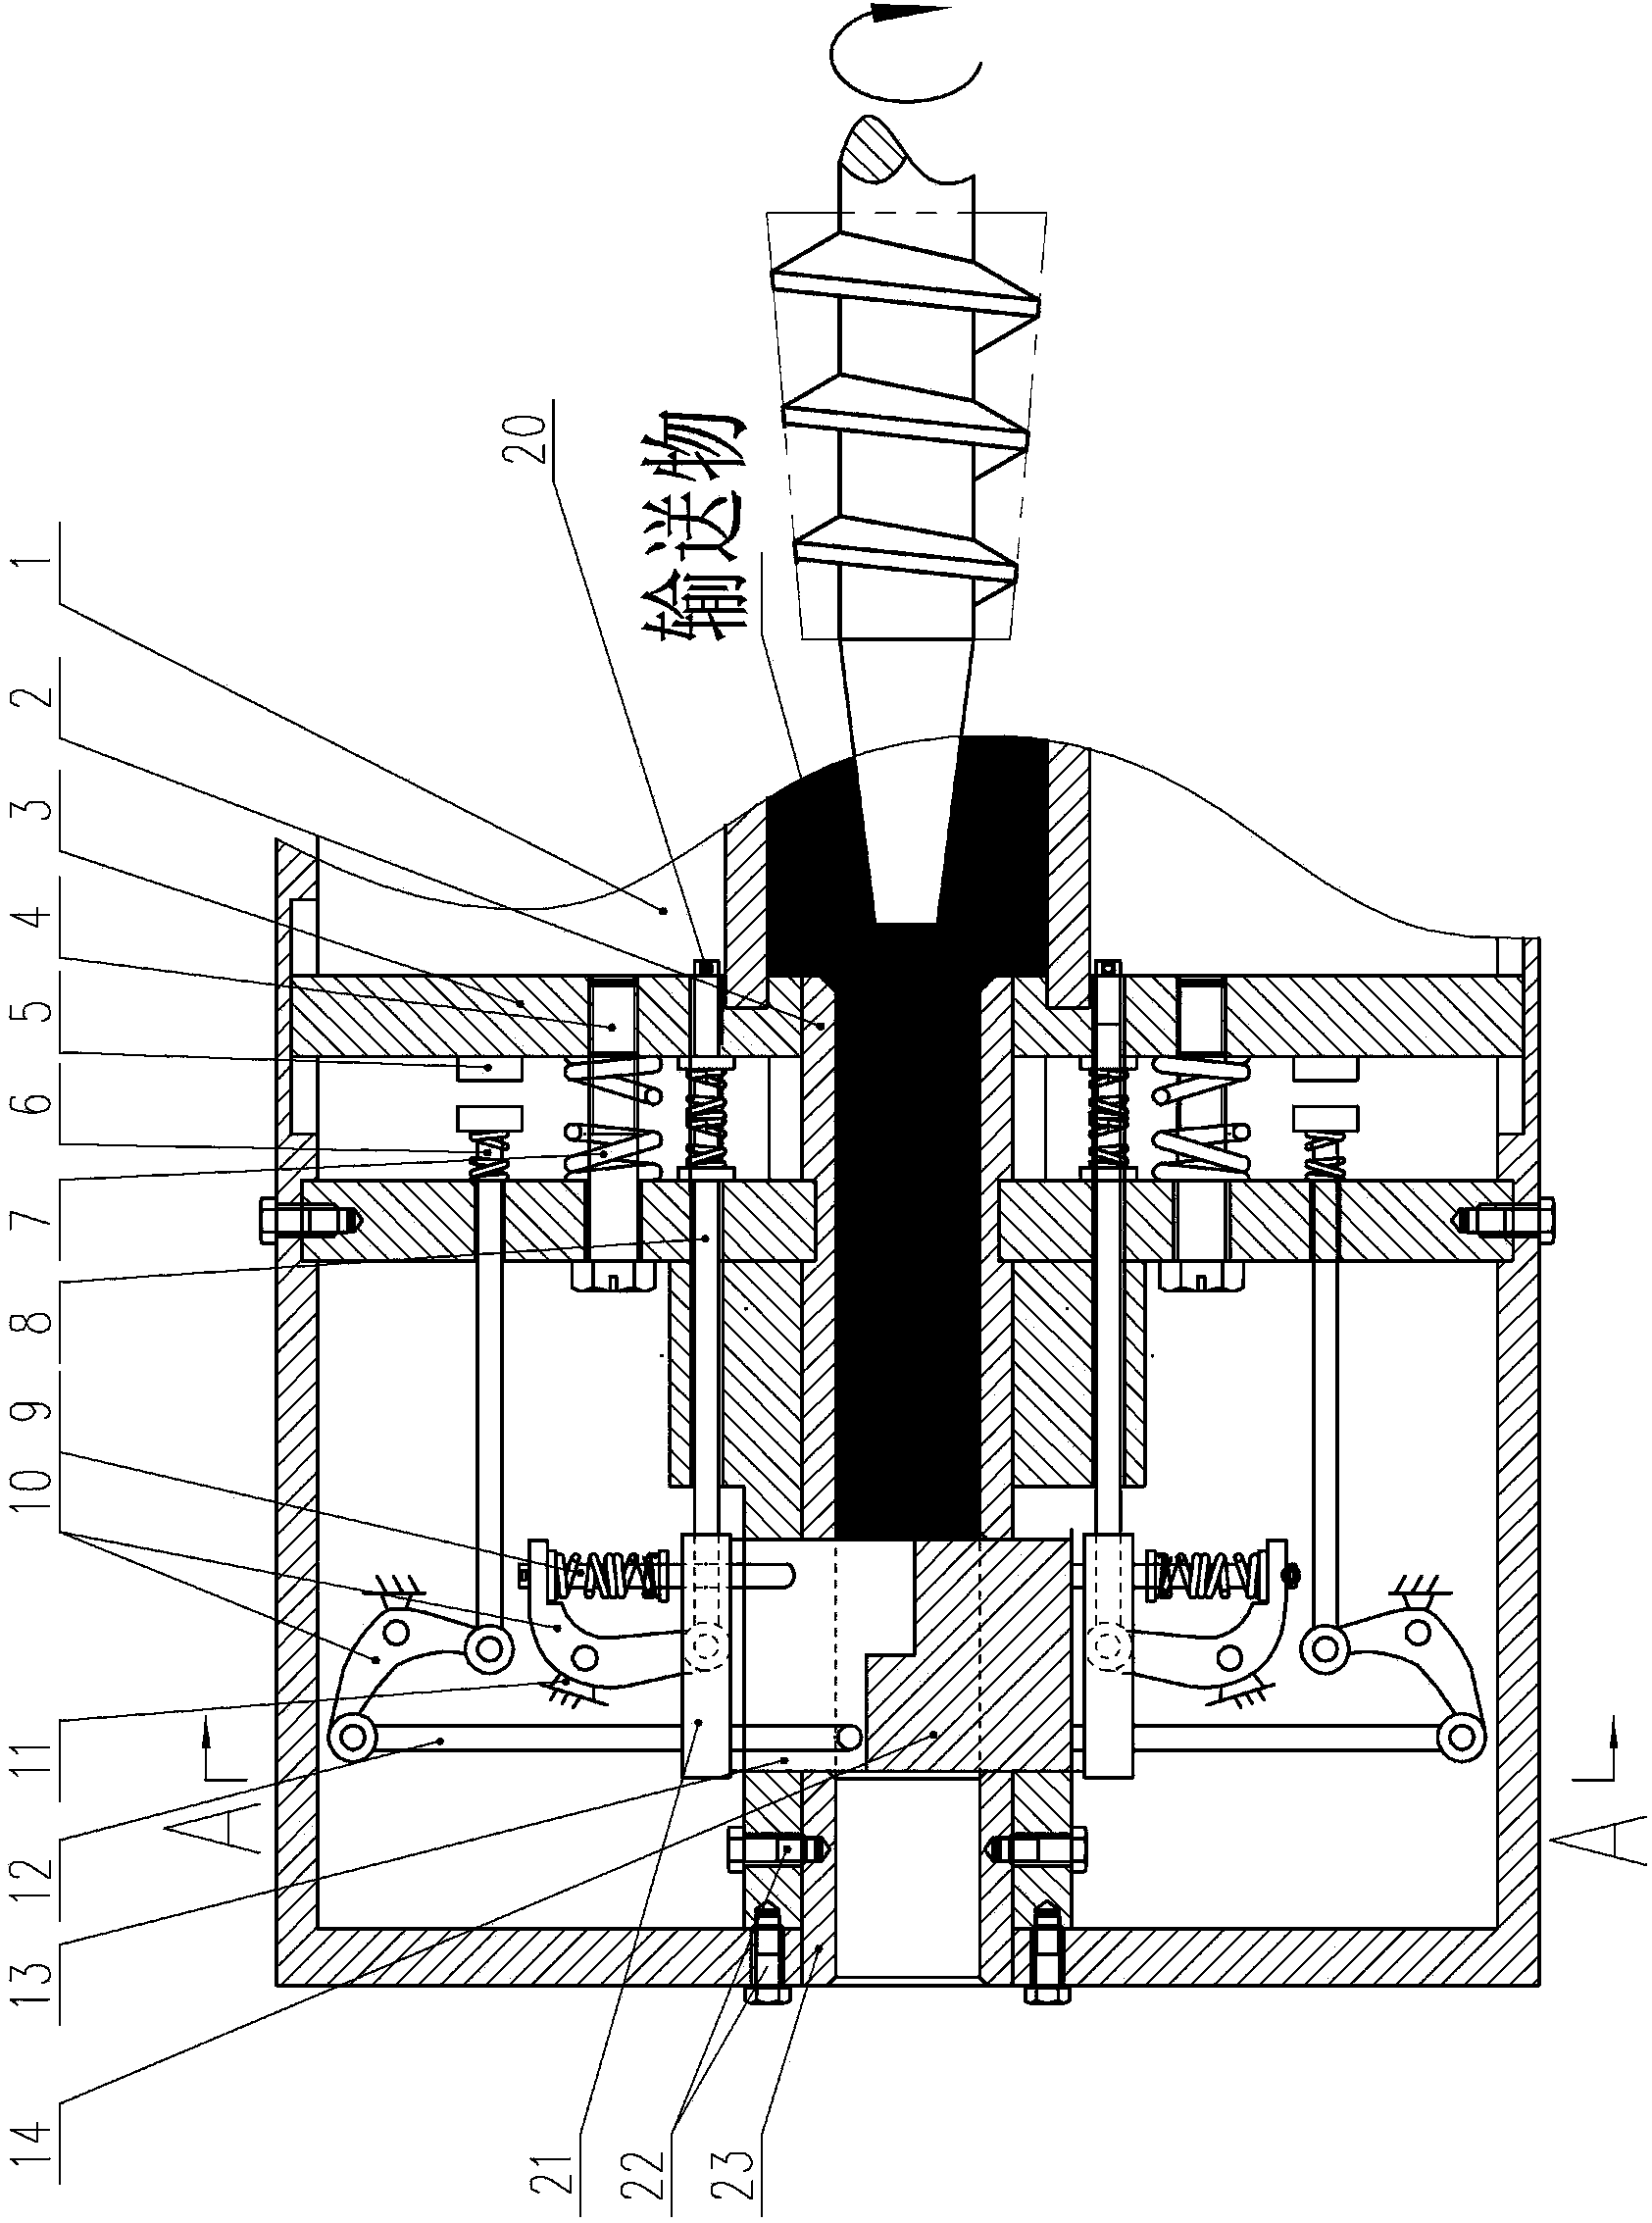 Mechanical normally-closed pressure valve